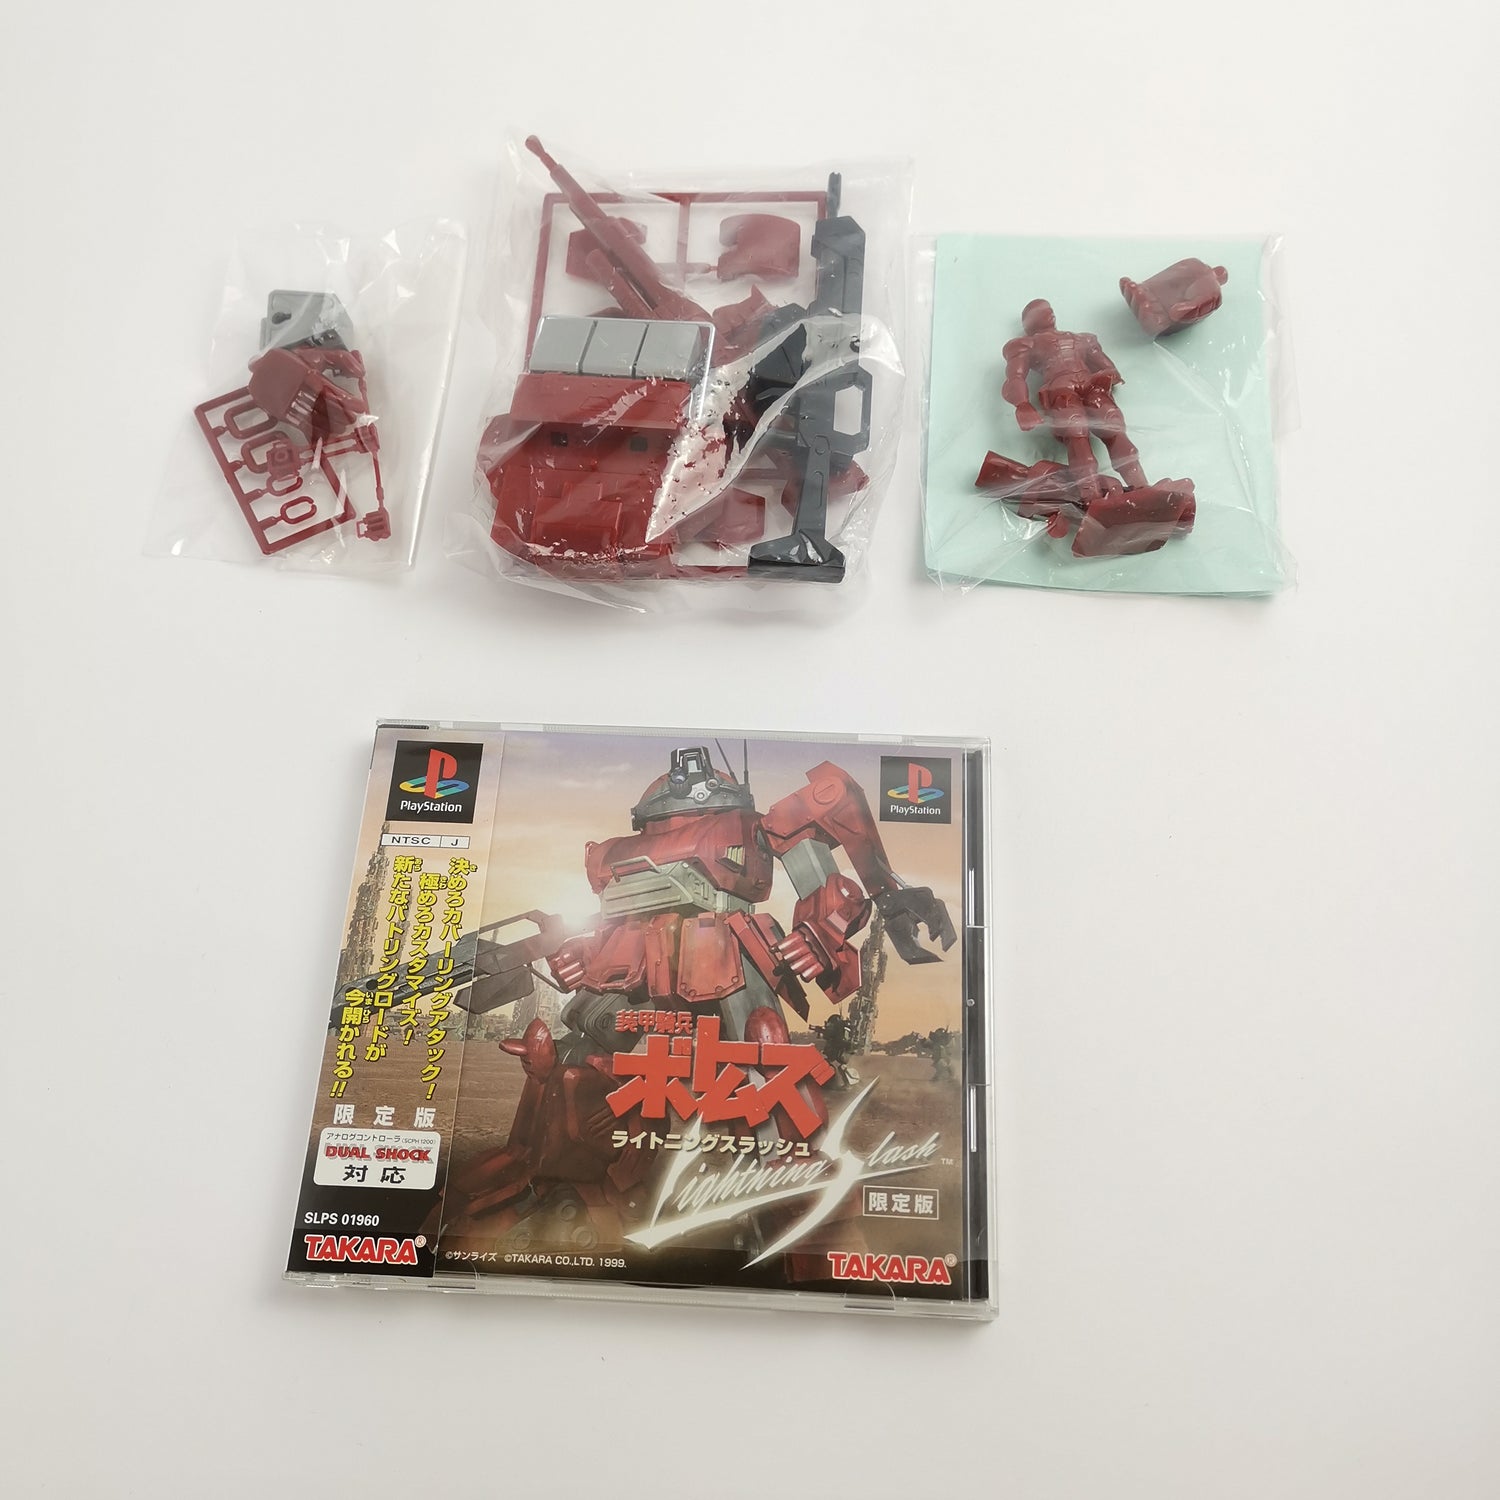 Sony Playstation 1 Game : Perfect Soldier Box 3 Limited Edition | PS1 Japan original packaging